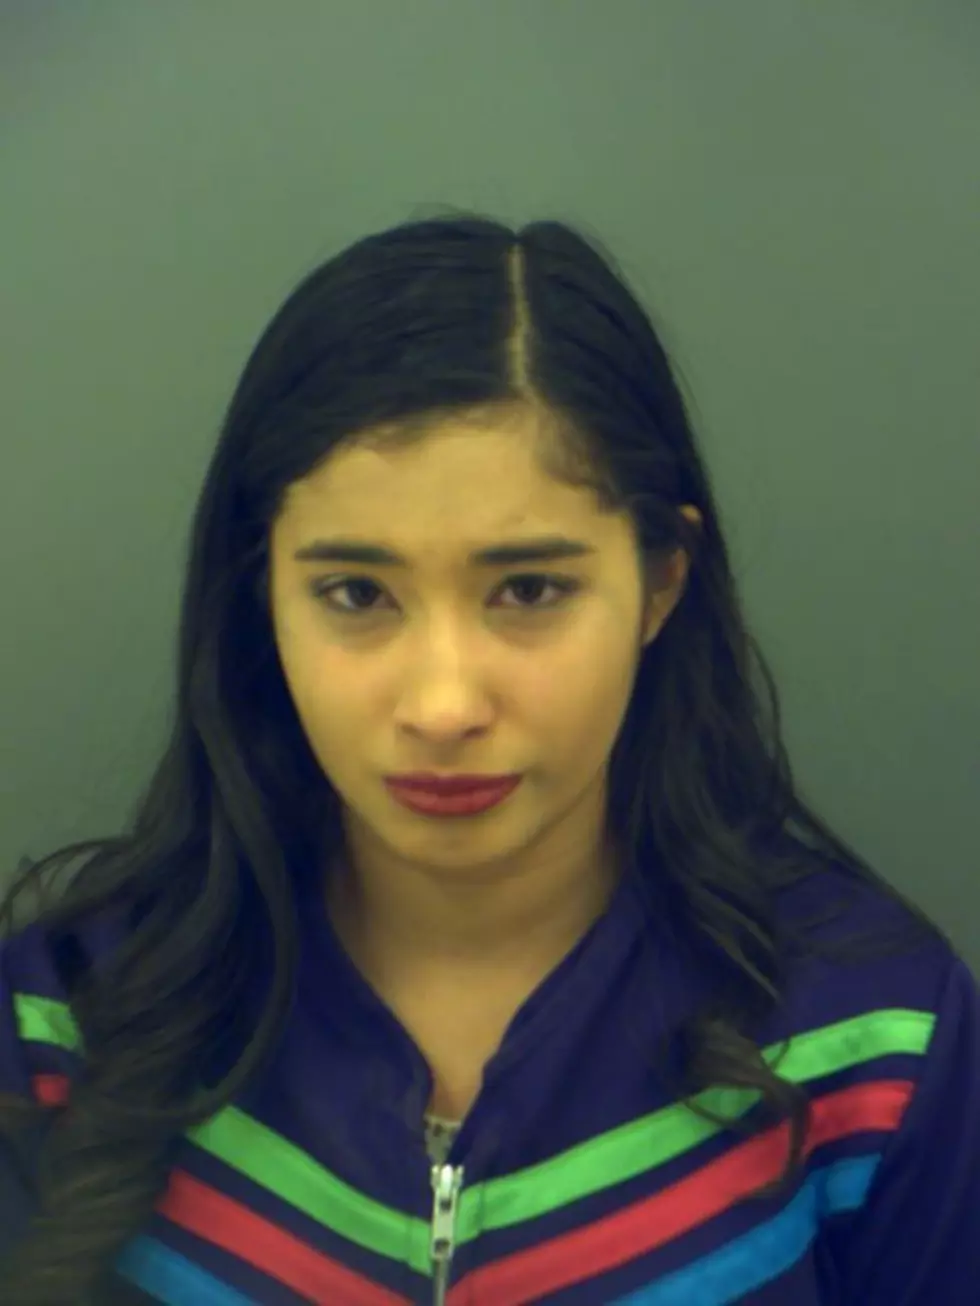 Texas Cheerleader Arrested For Trying to Steal Her Uniform